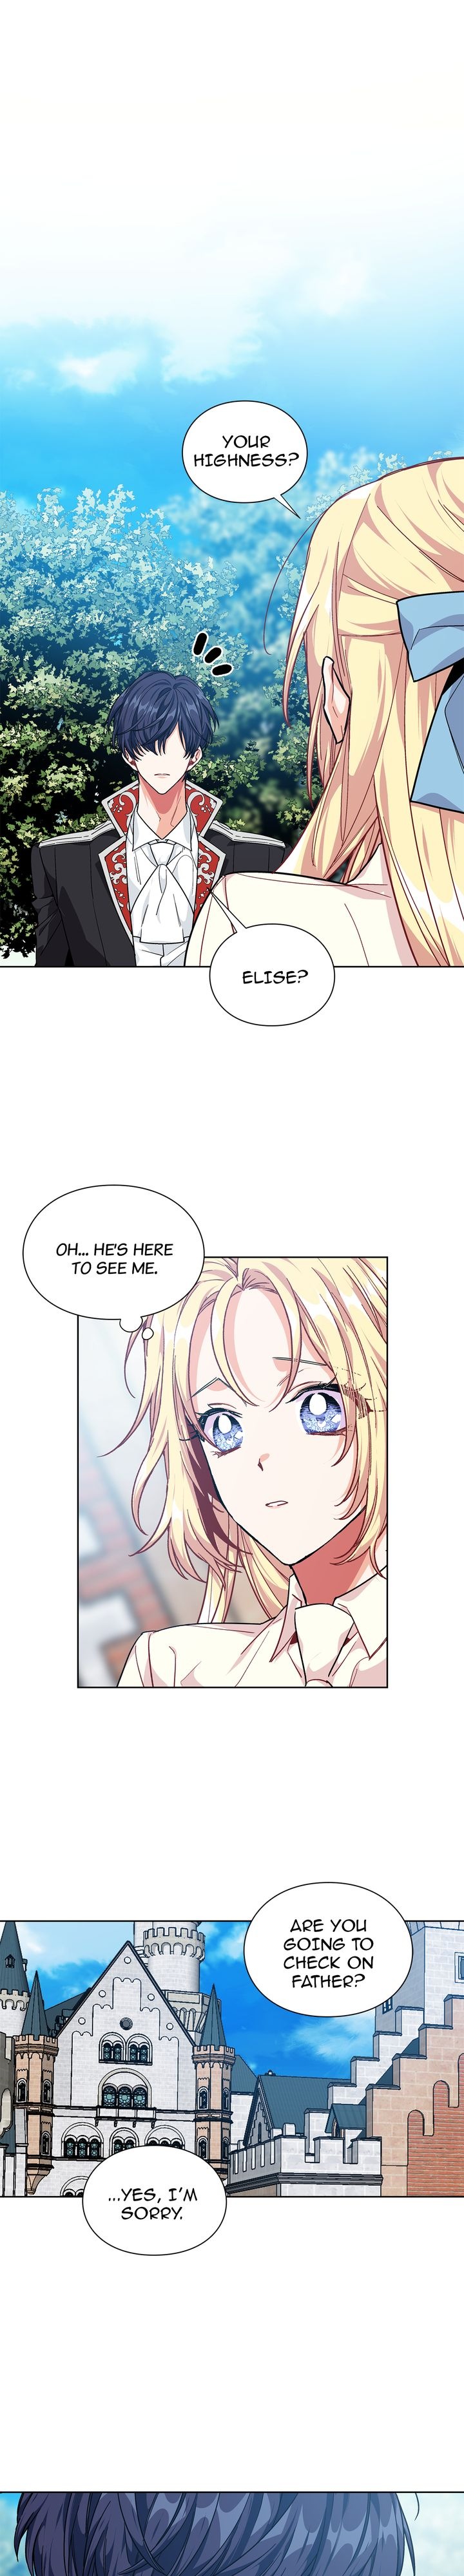 Doctor Elise – The Royal Lady with the Lamp - Chapter 105 Page 20